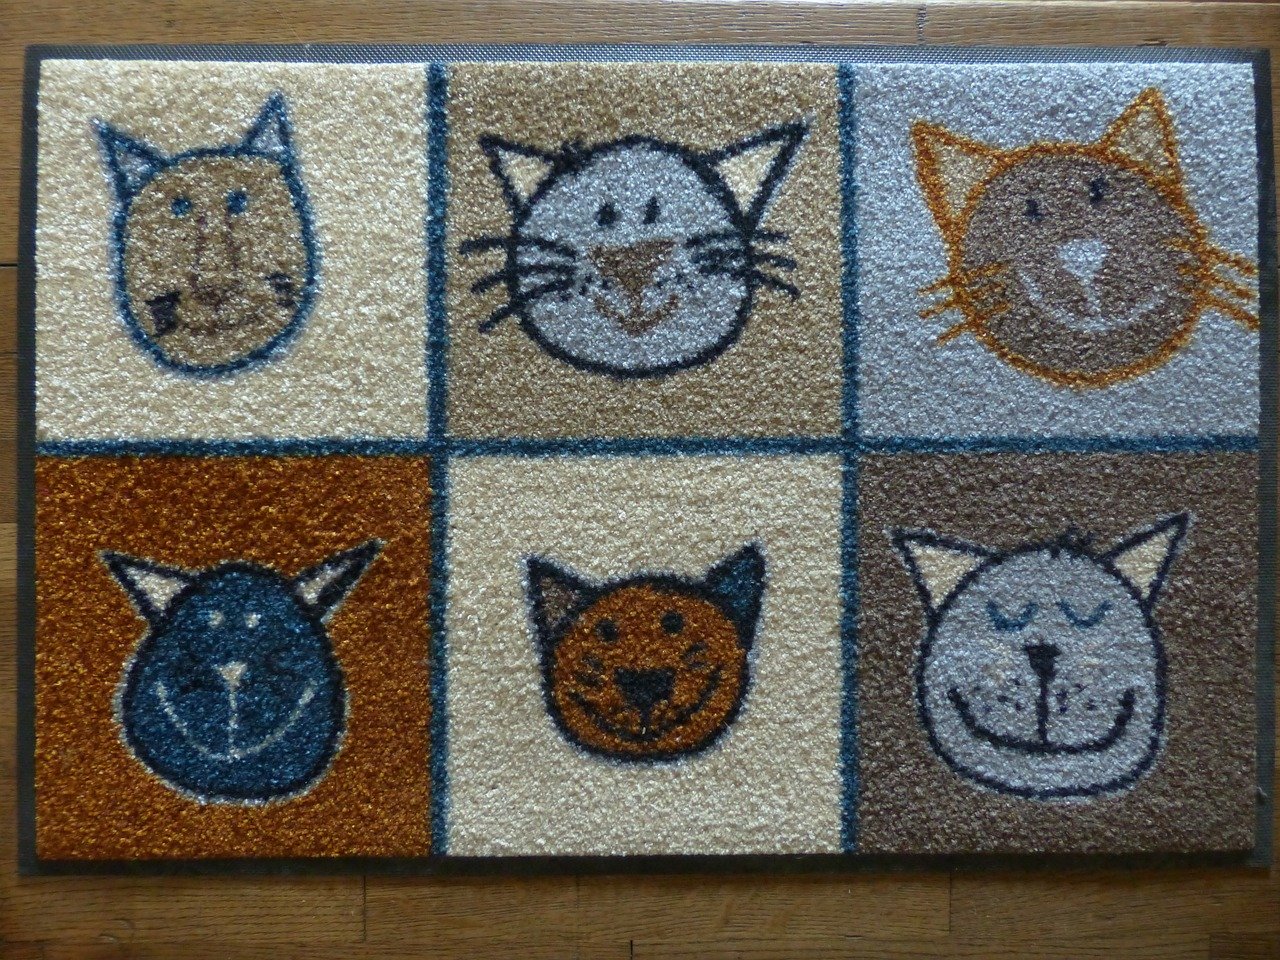 Photo of a floor mat on timber floor with 6 cats printed on it